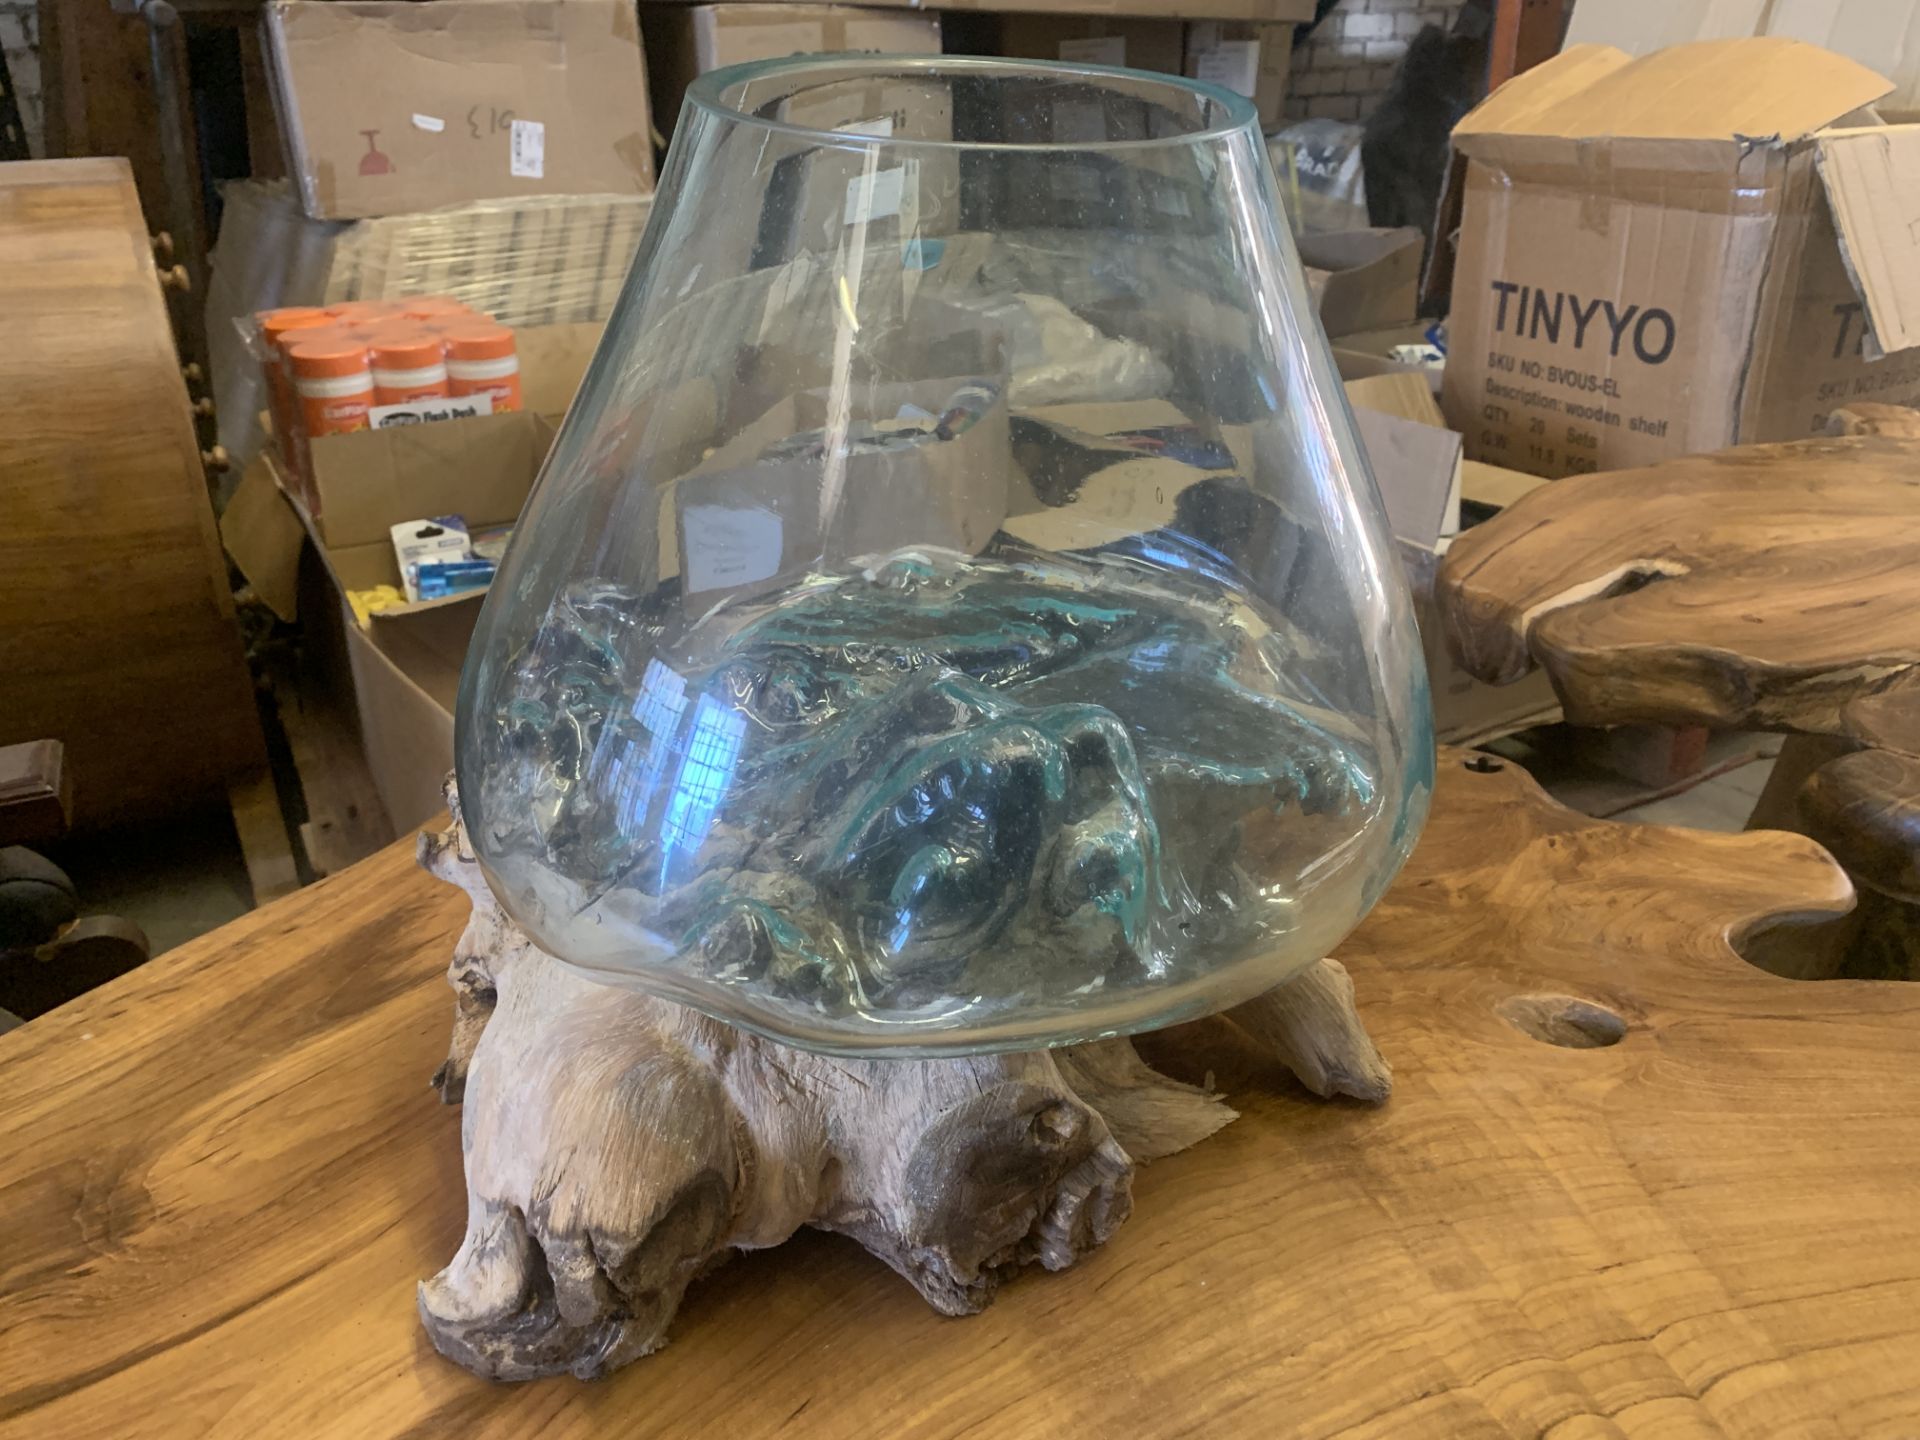 TEAK ROOT WITH GLASS VASE L15 X W20 X H30 RRP £195